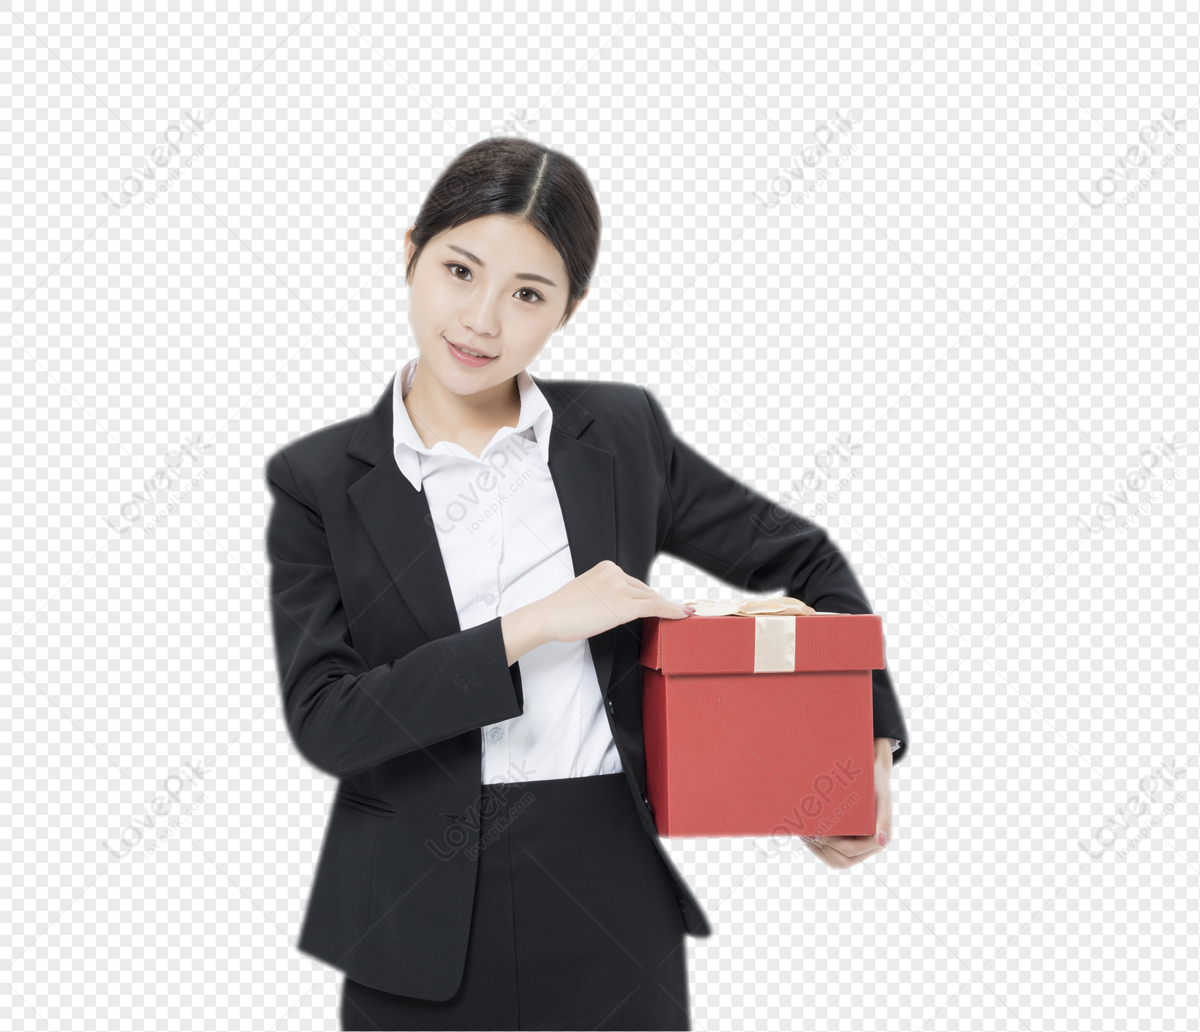 Professional woman giving a present, Gift, portrait, company png free download